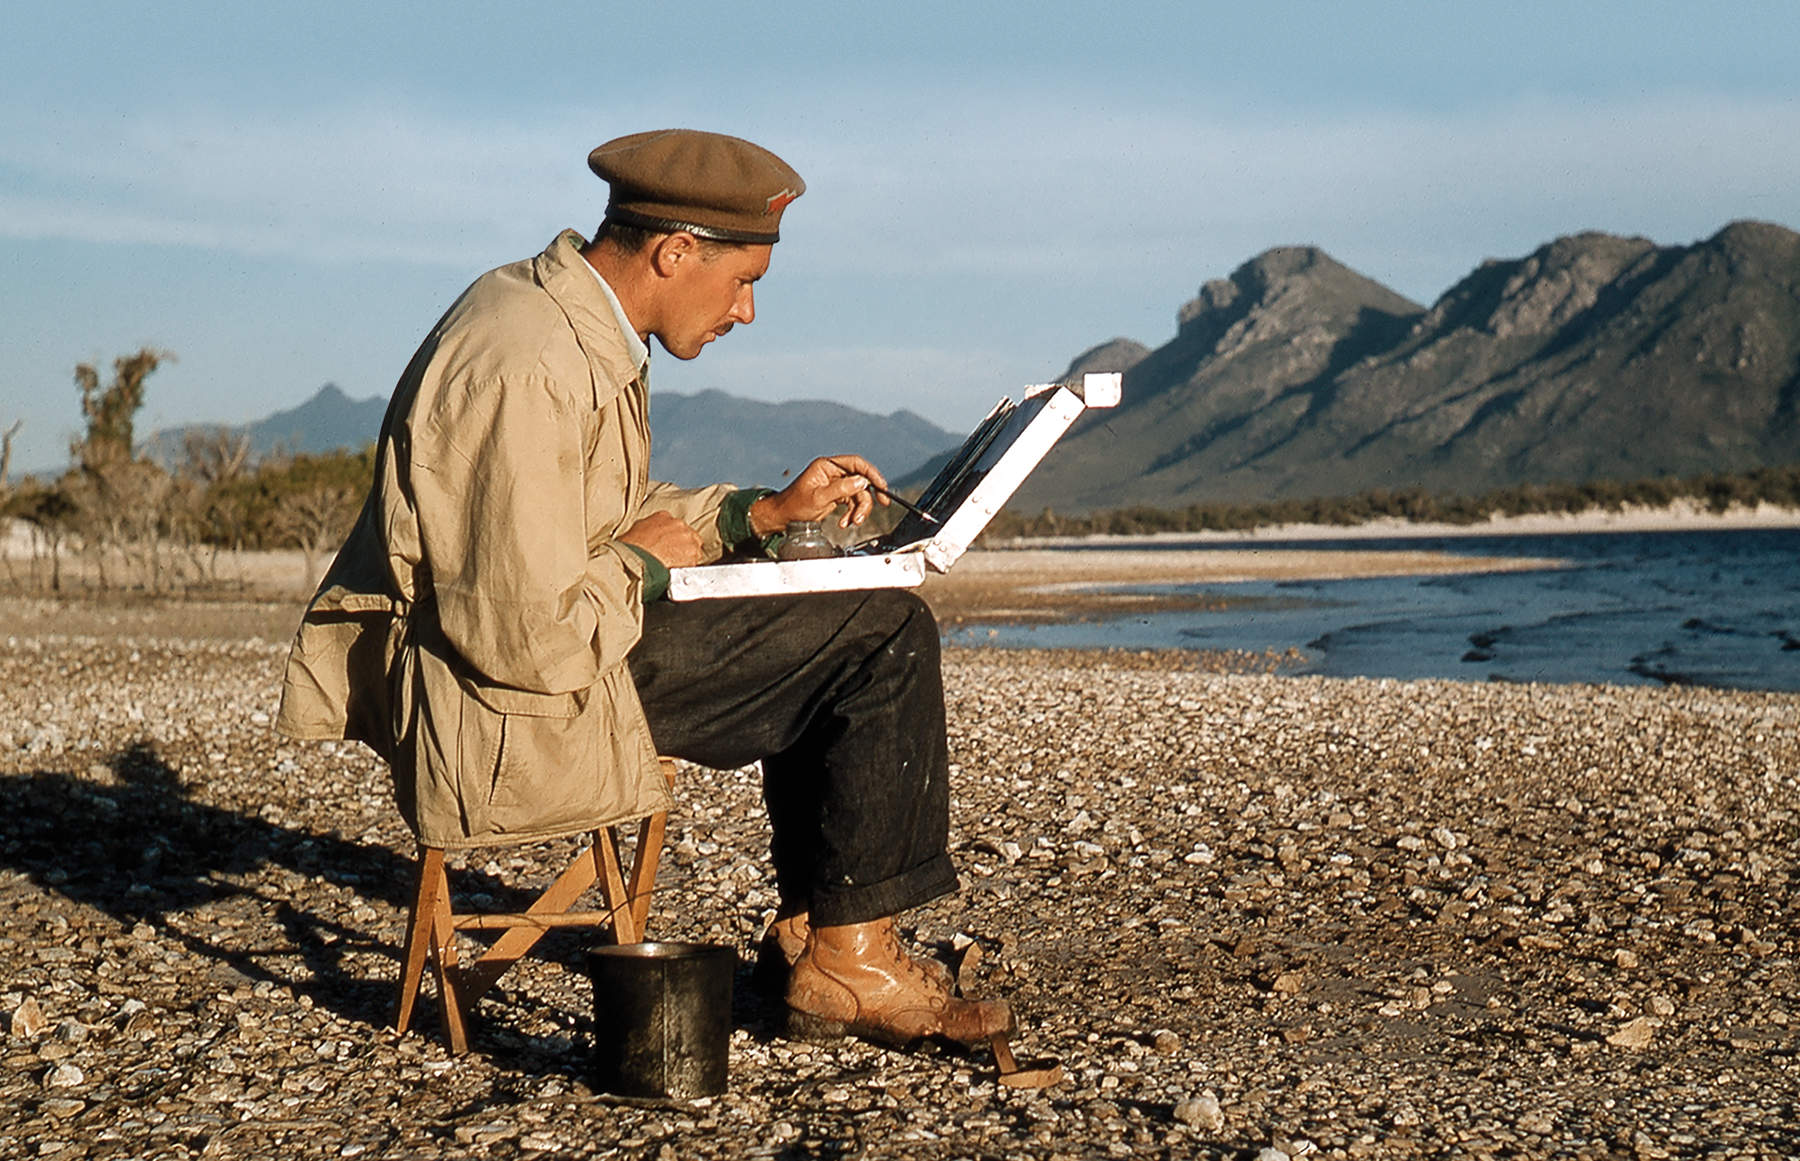 Photograph of artist Max Angus by fellow artist Patricia Giles captures Max as a young man wearing his trademark beret and seated on the shore of Lake Pedder, painting en plein air.